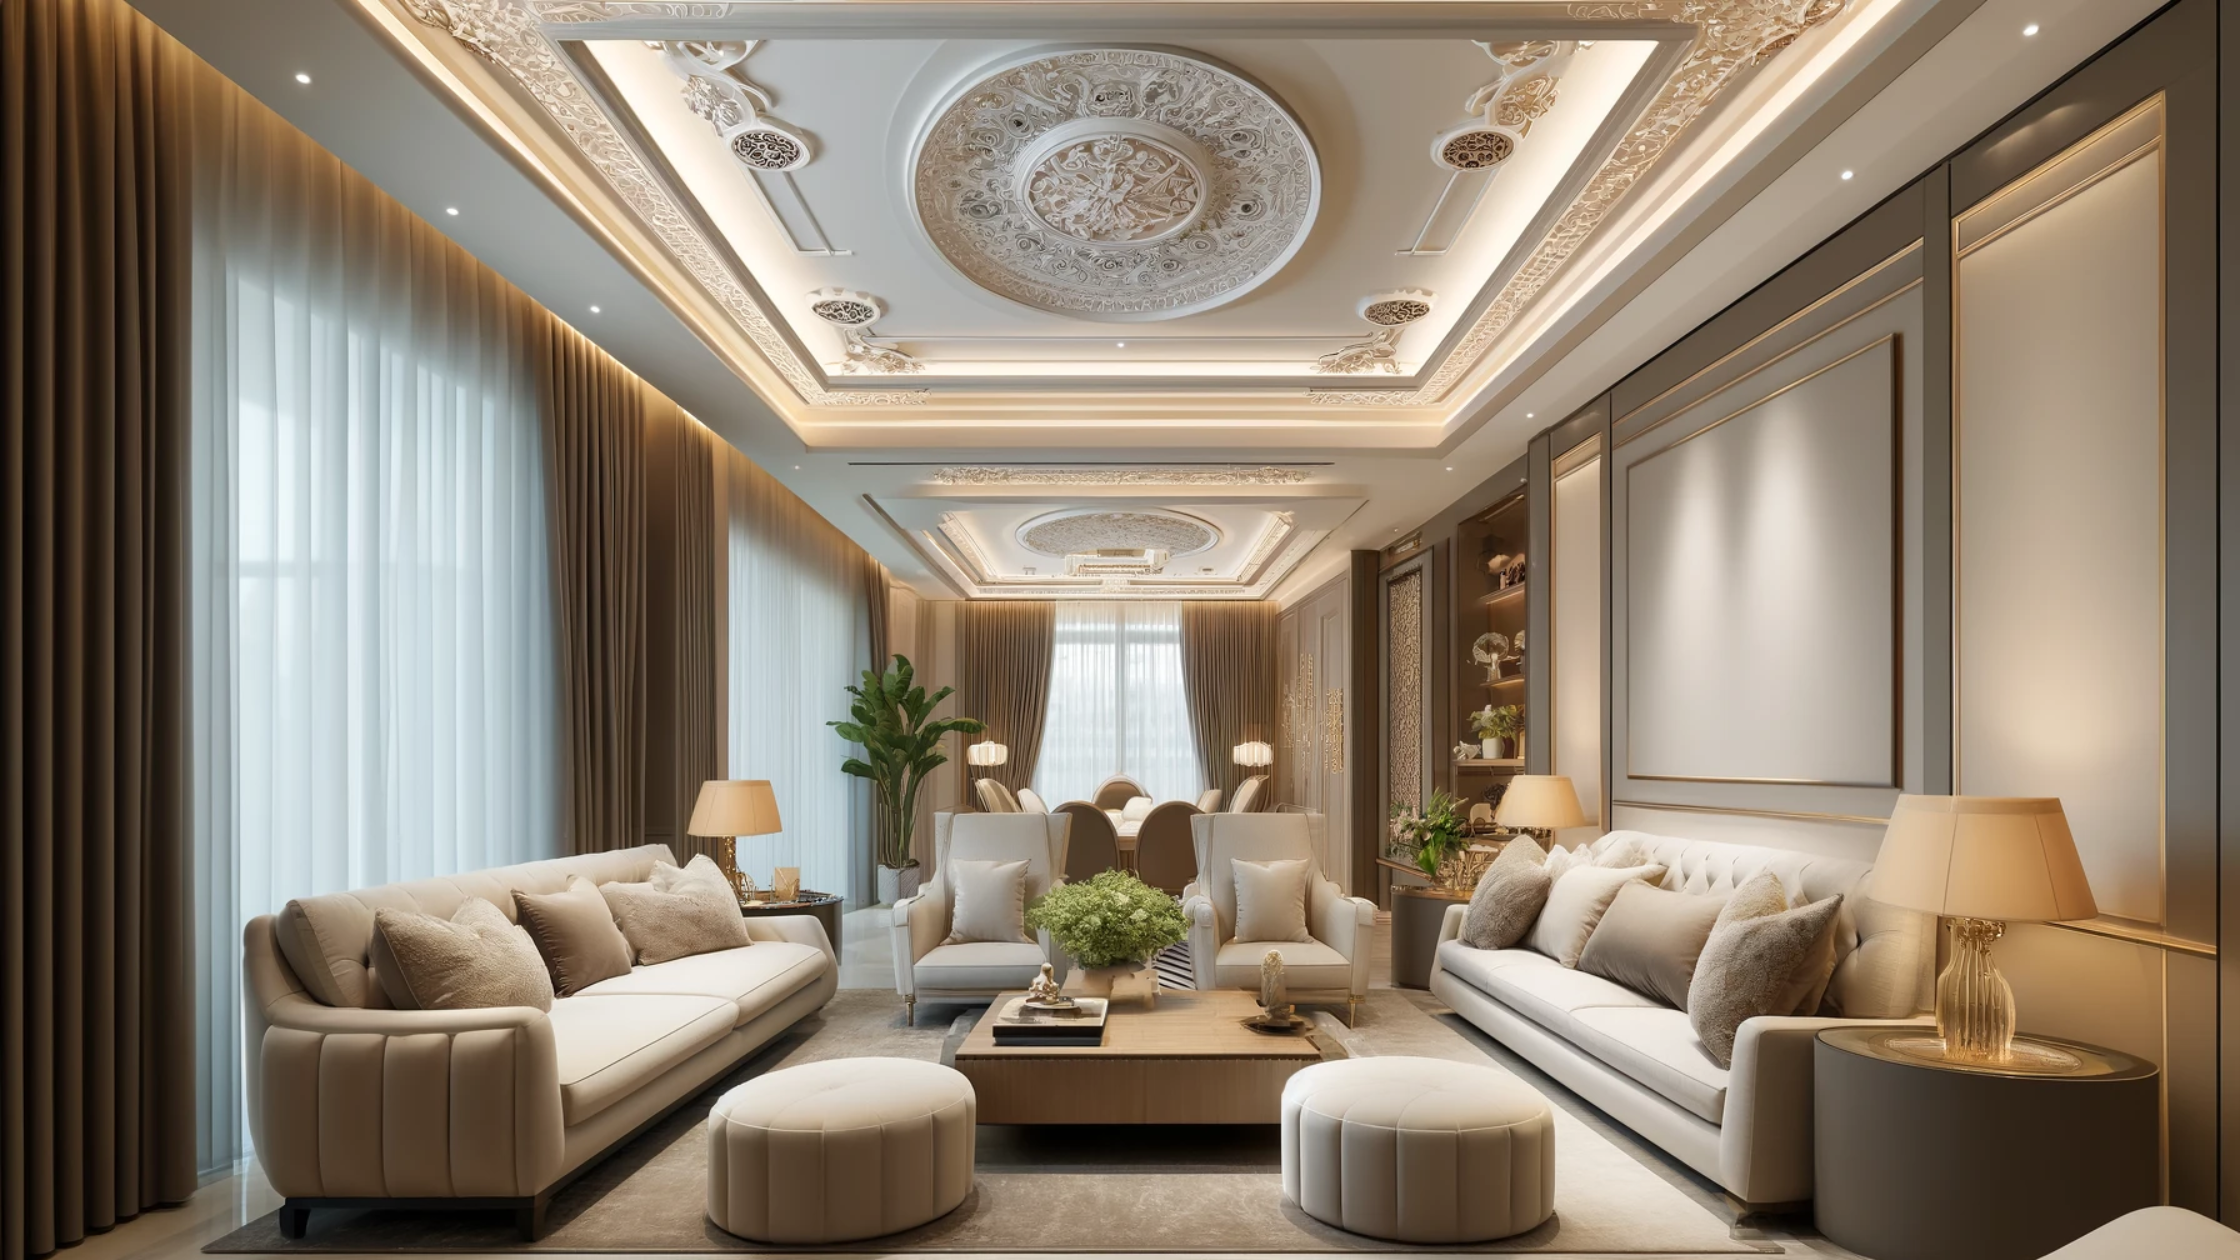 SJ DESIGN CONSULTANTS - NEW DELHI - Is False Ceiling Your Only Option? Explore Ceiling Design as an Opportunity to Expand Interiors